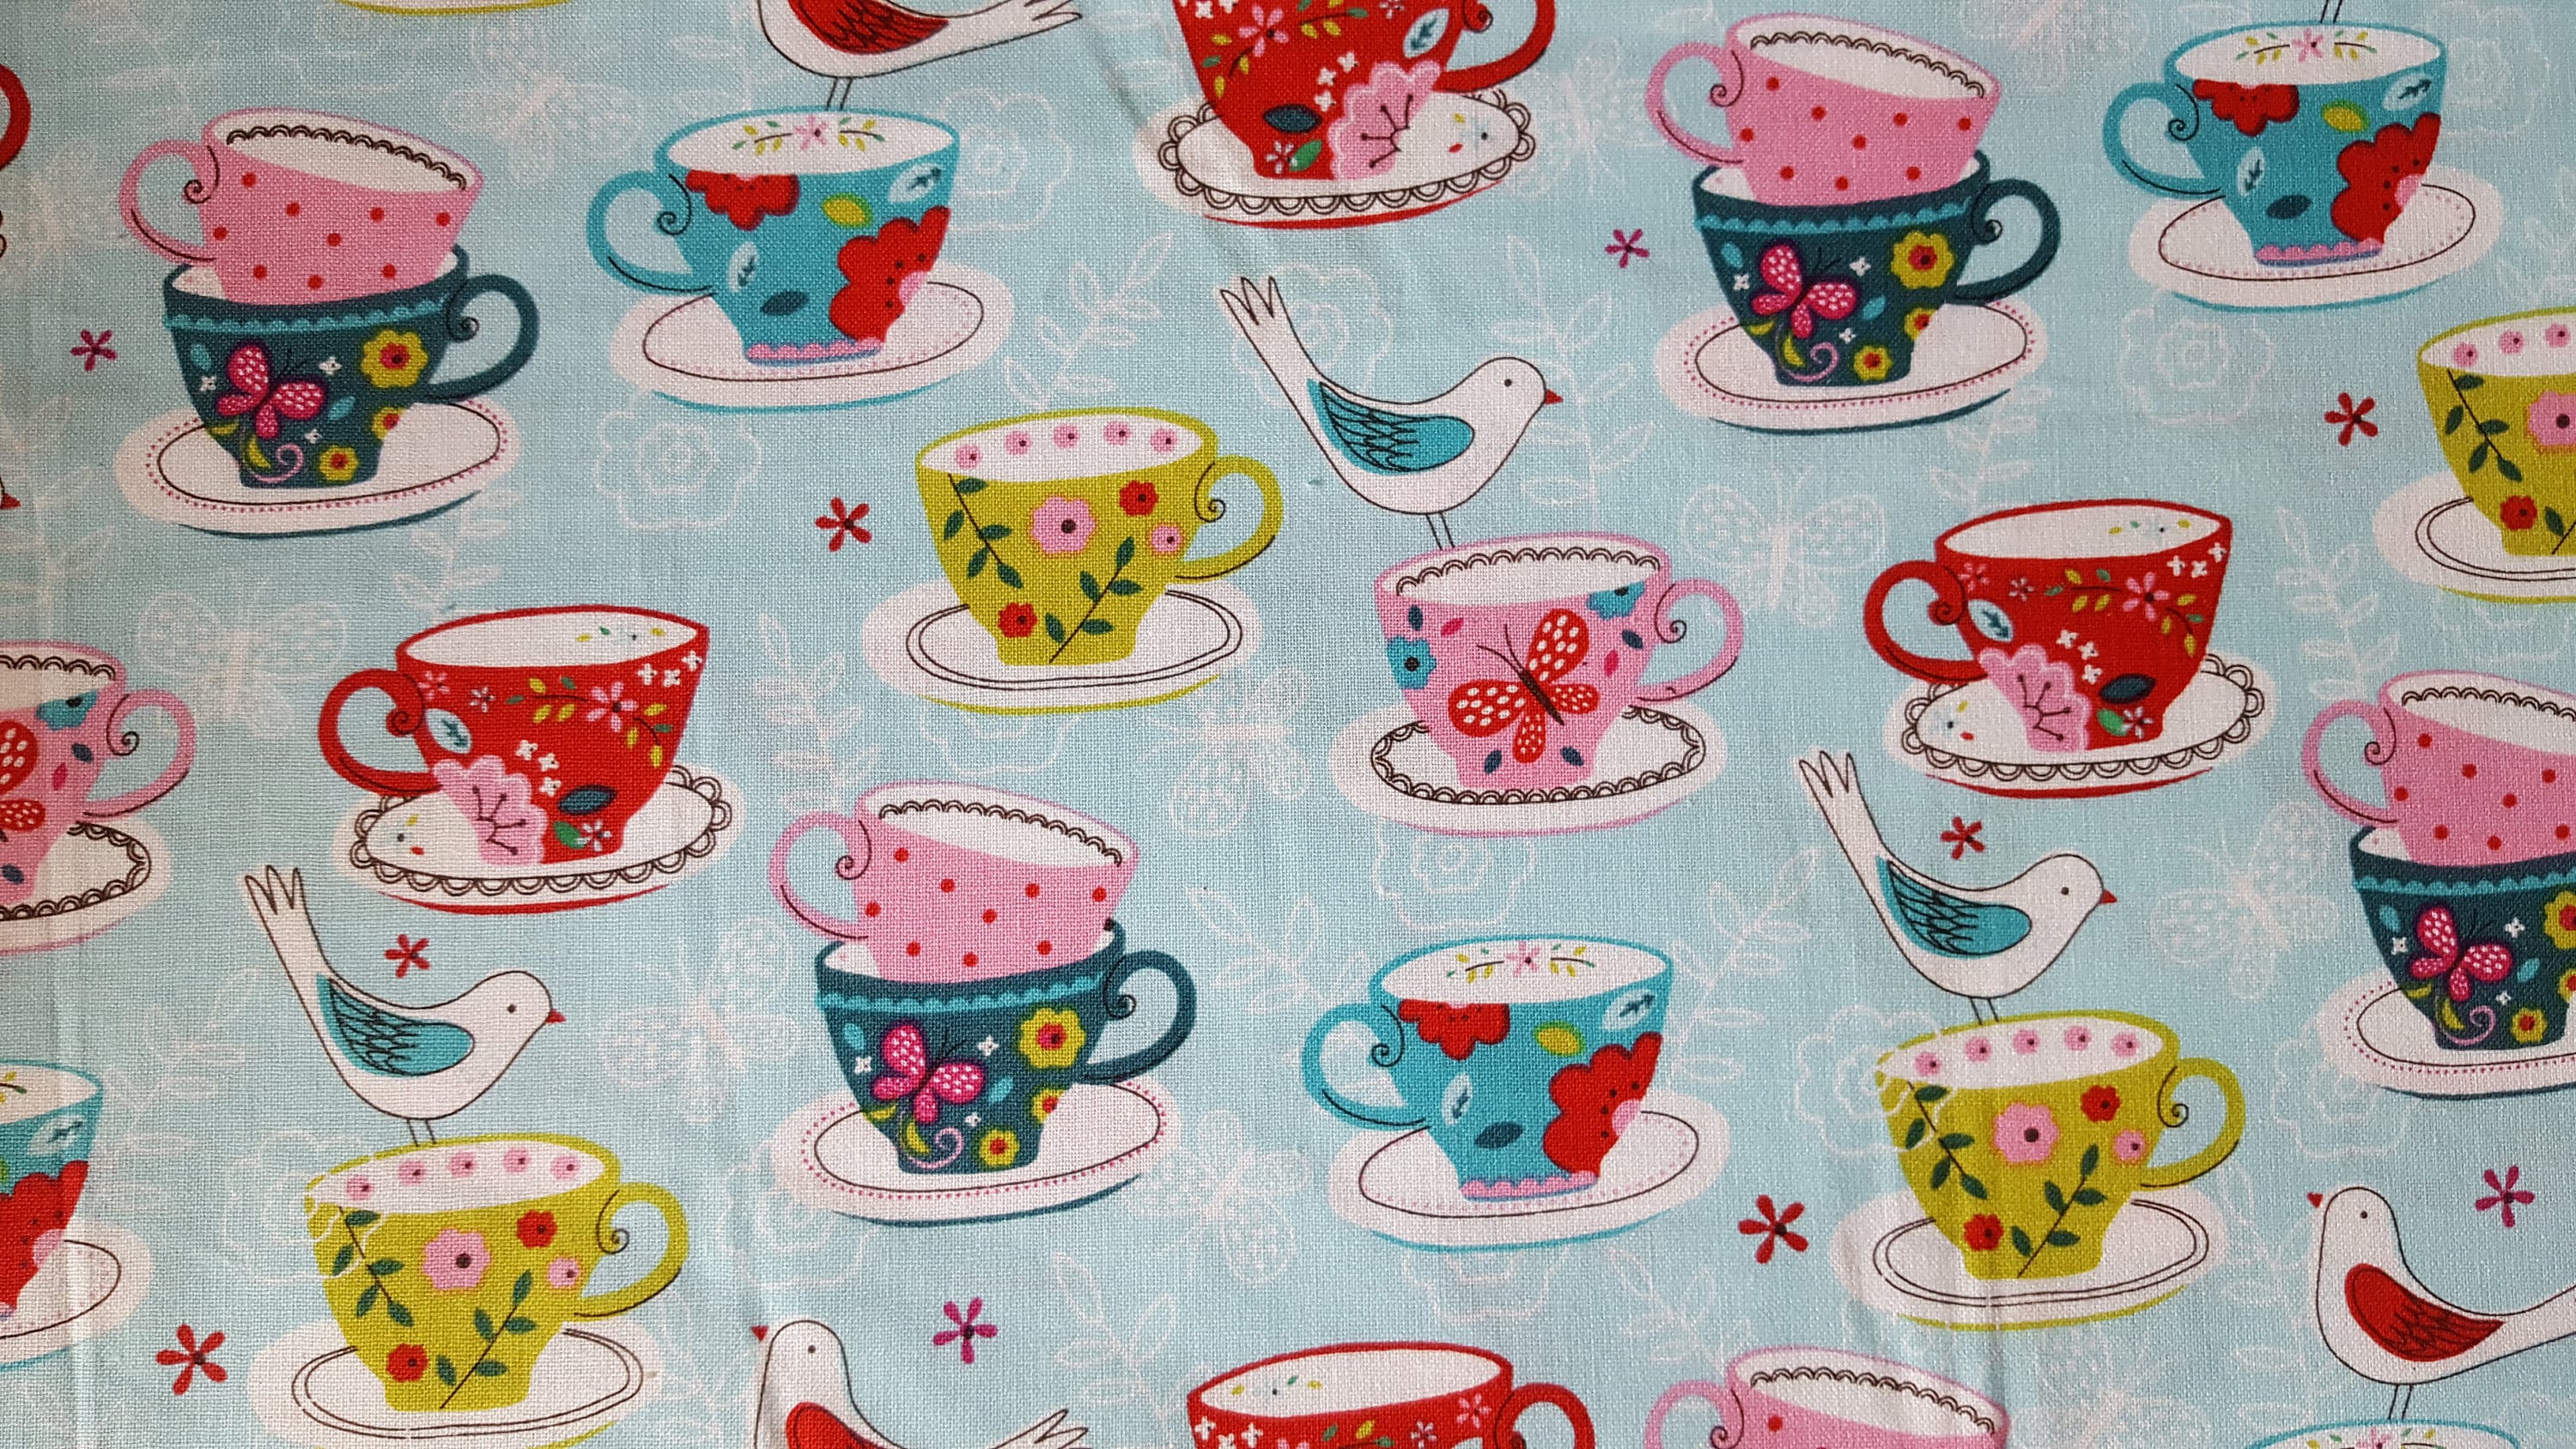 Birds & Tea Cups Cotton Fabric (1 yard 16 inches) from GGselections on ...